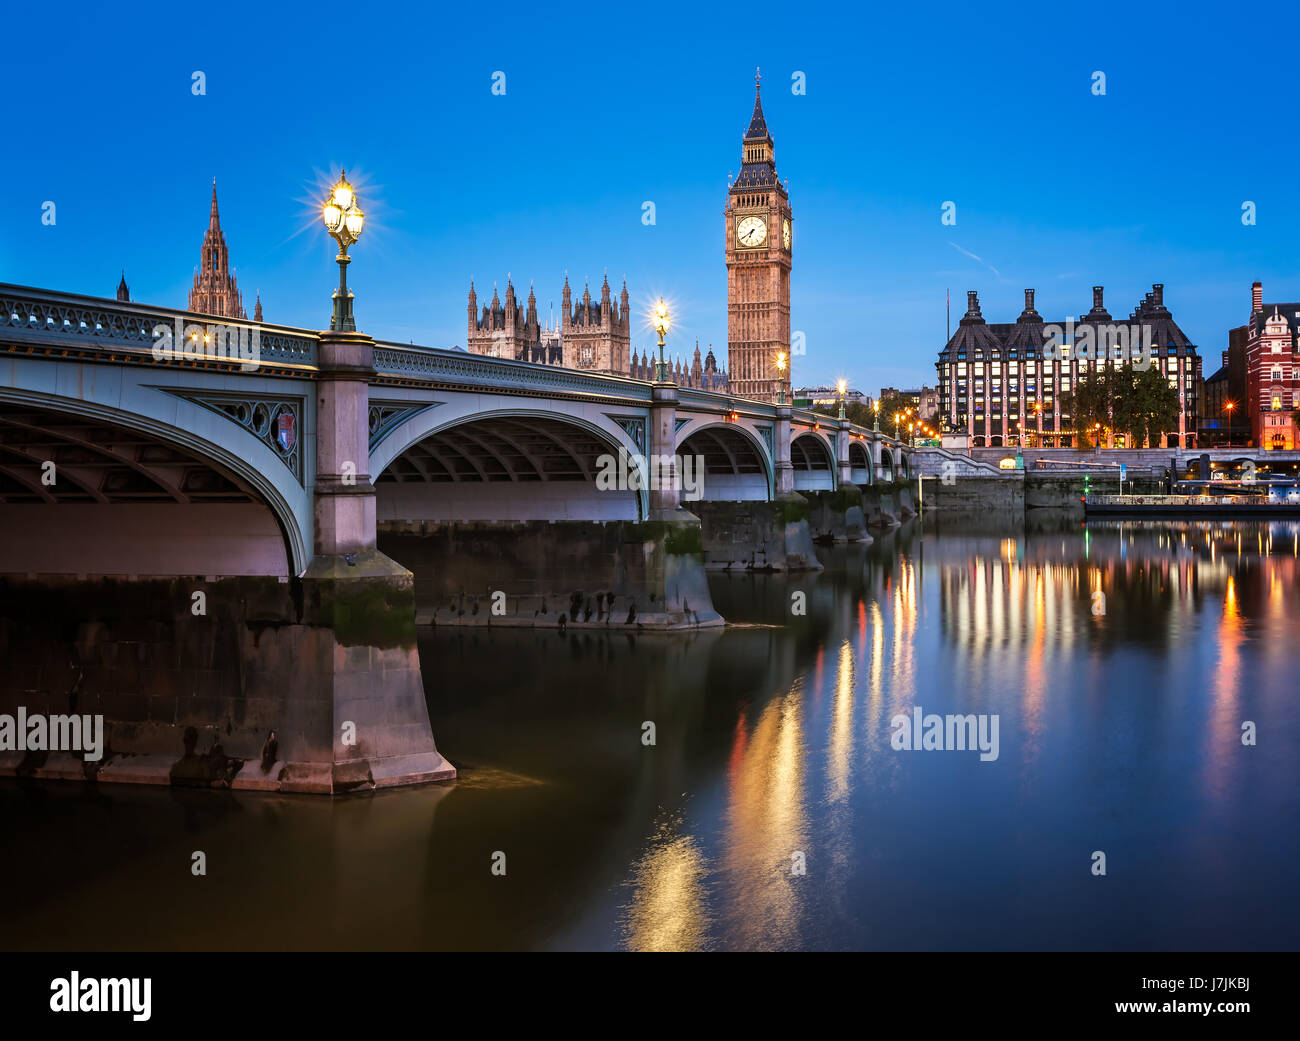 Big Ben, Queen Elizabeth Tower and Westminster Bridge Illuminated in the Morning, London, United Kingdom Stock Photo